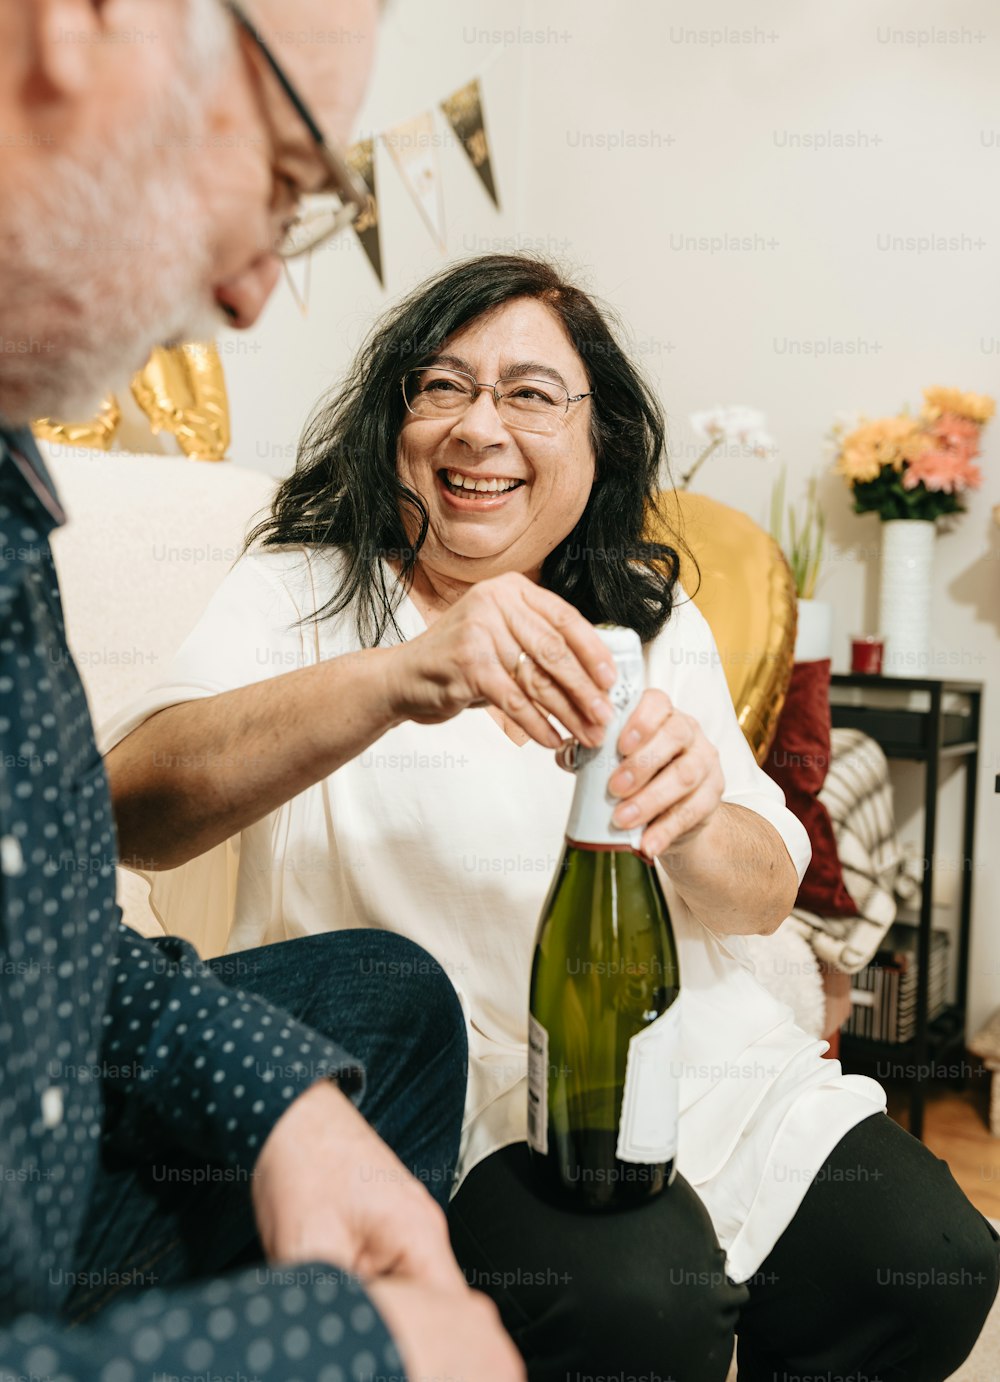 a woman opening a bottle of wine while a man looks on